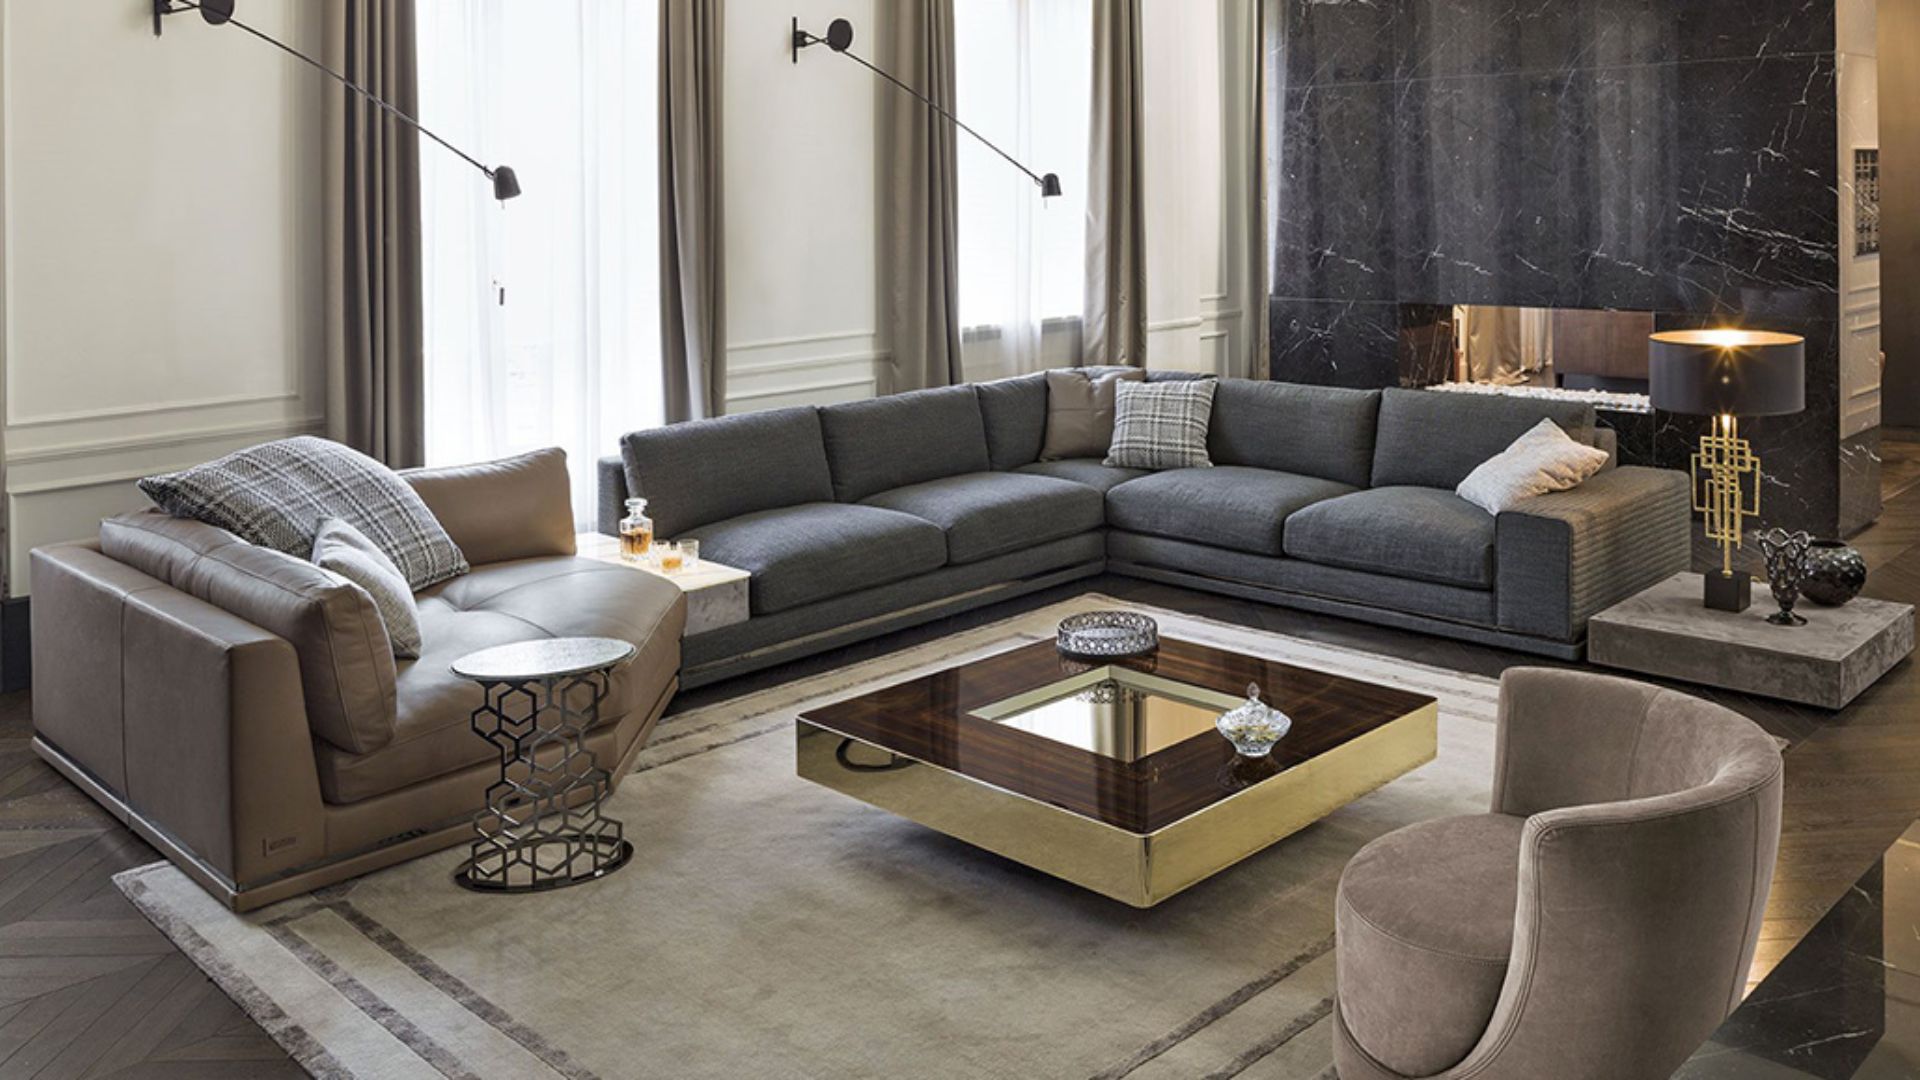 Why Italian Furniture in Los Angeles is Highly Coveted?